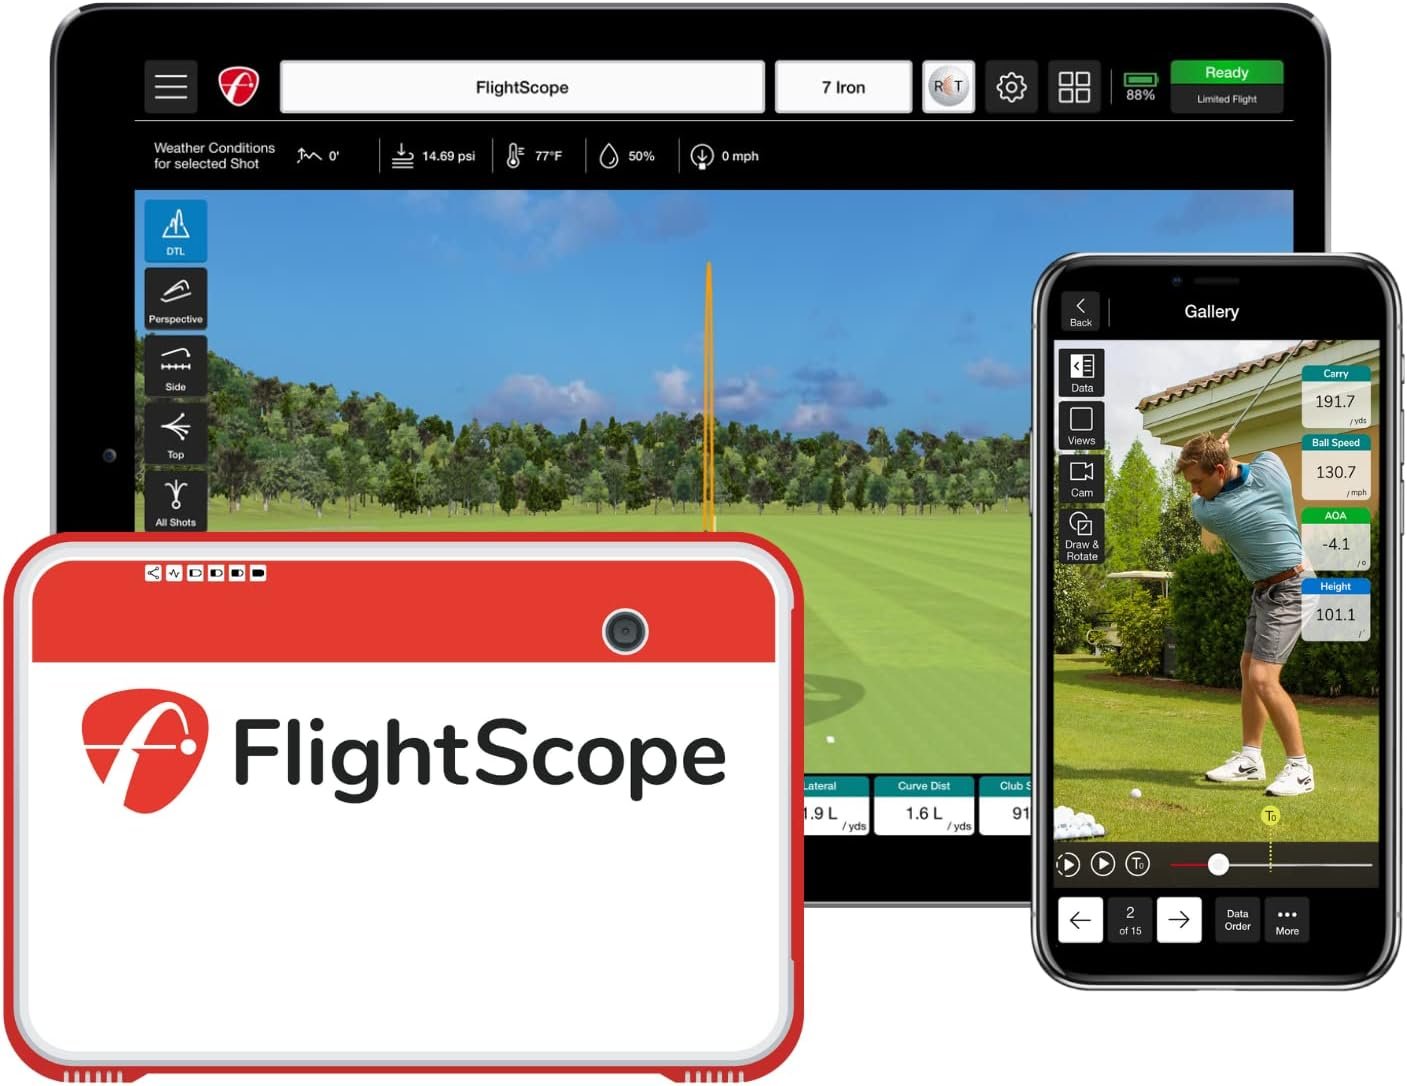 FlightScope Mevo+ 2023 Edition - Portable Golf Launch Monitor, Rangefinder and Simulator | 20+ Full Swing and Short Game Data Parameters, 10 Courses and 17 Practice Ranges Included